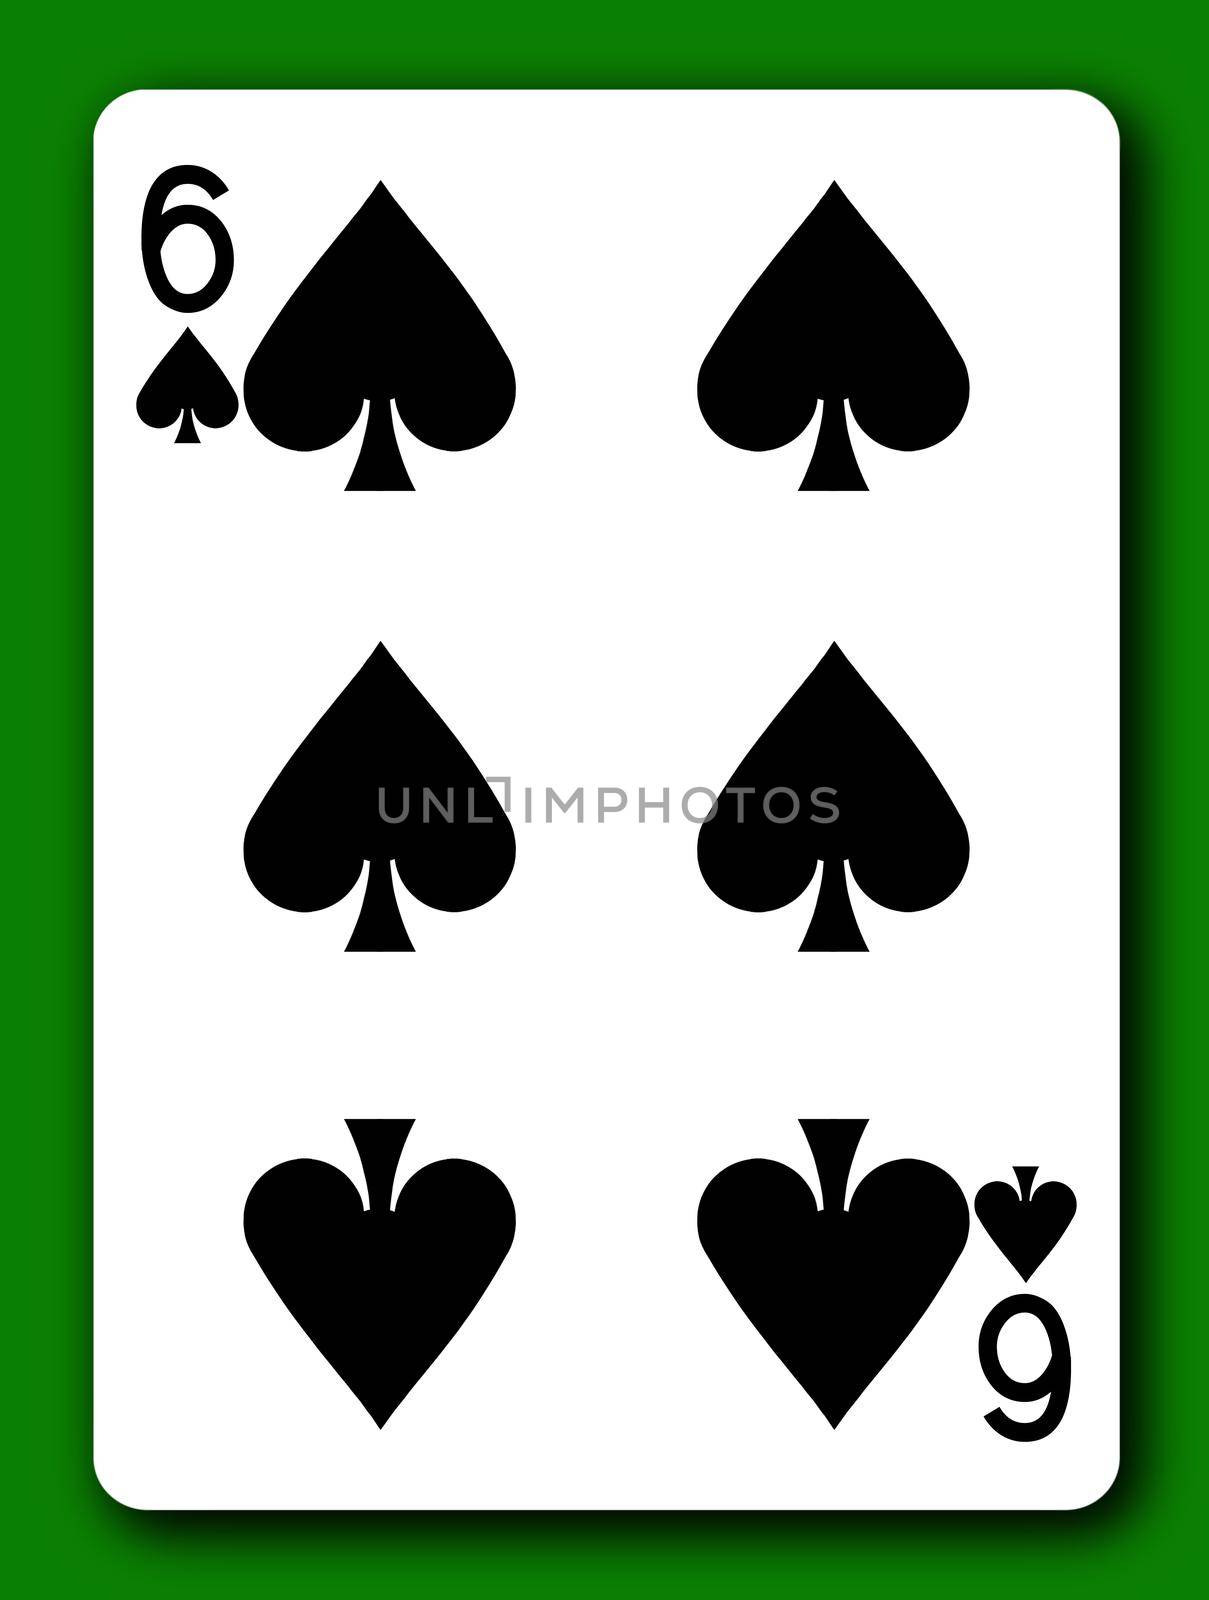 6 Six of Spades playing card with clipping path to remove background and shadow 3d illustration